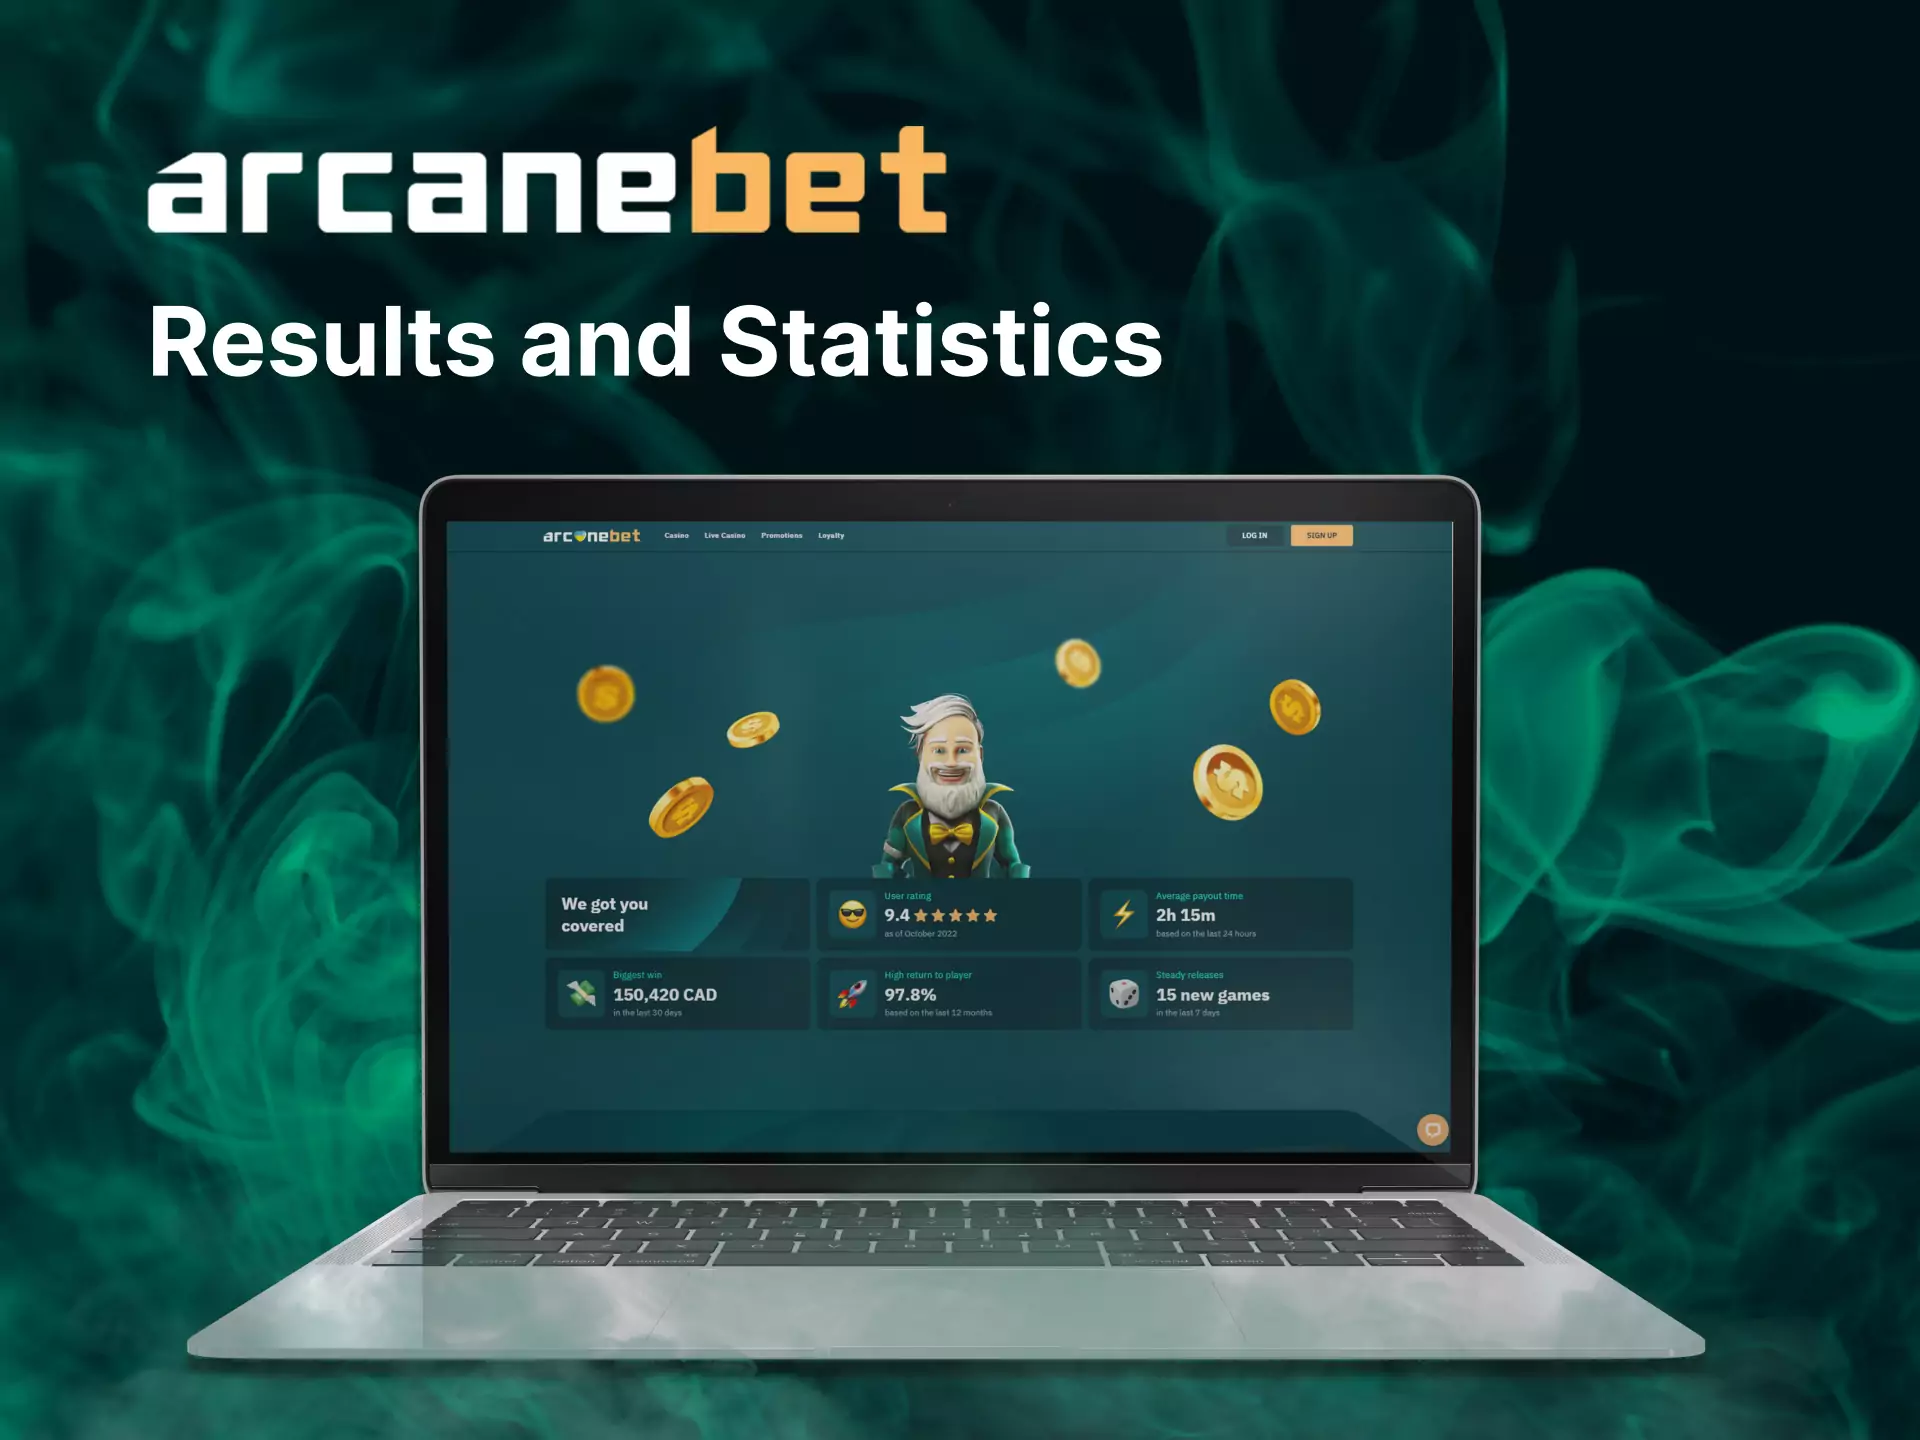 Find out the results of the games that are important to you with Arcanebet.